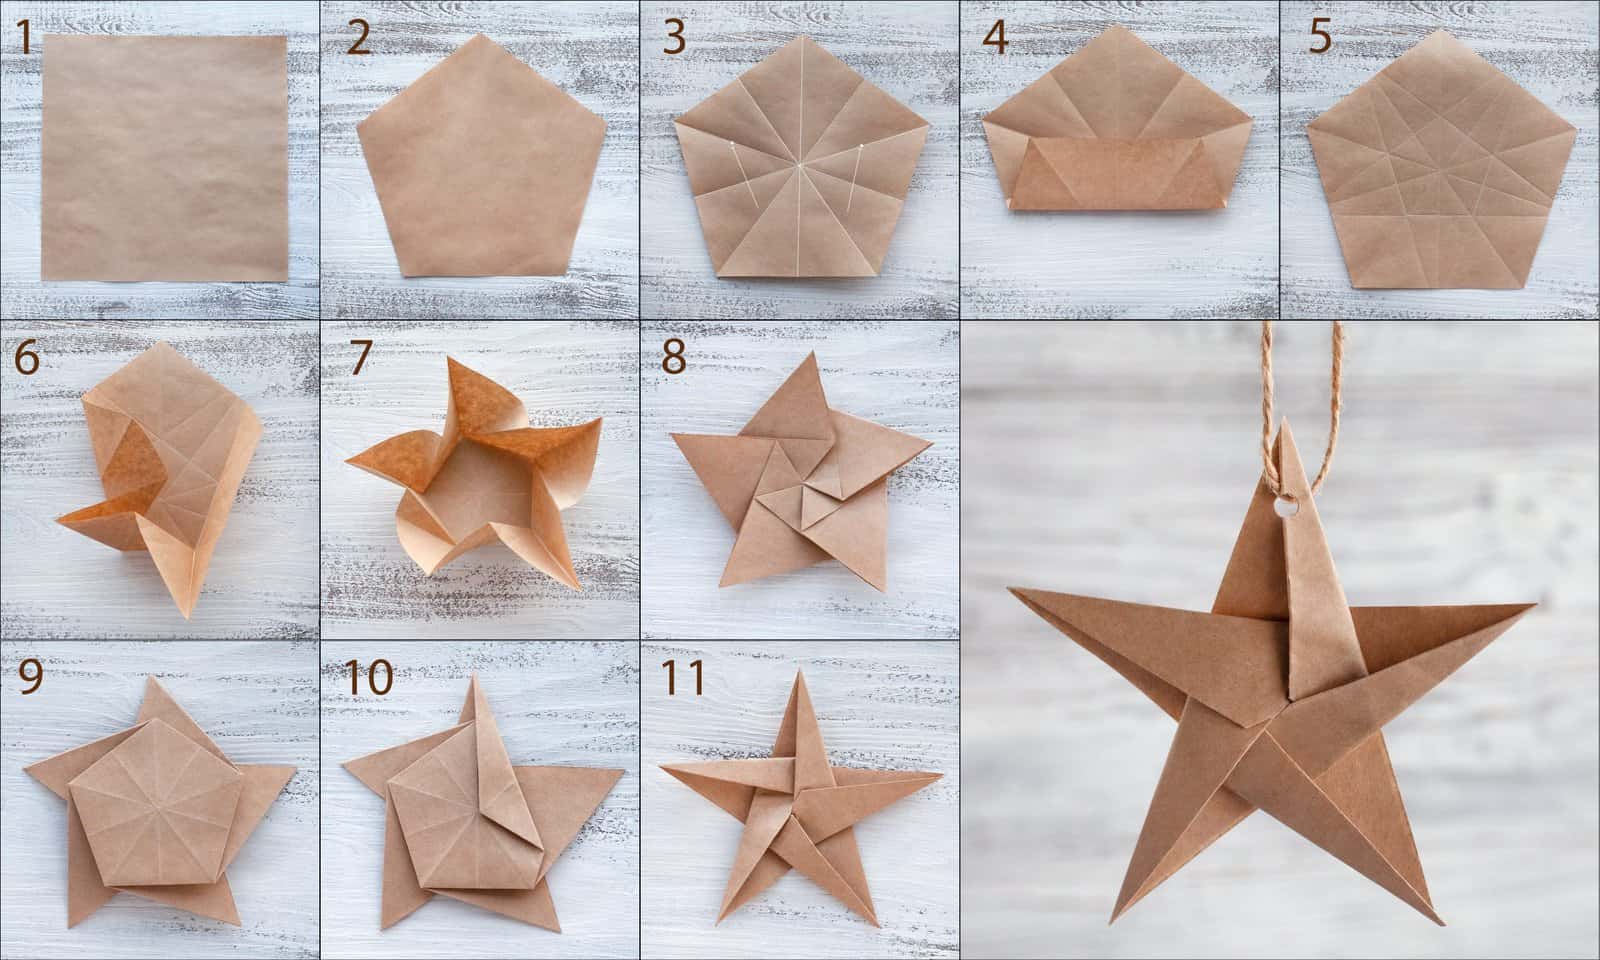 Step-by-step photo instruction how to make origami paper Christmas star.